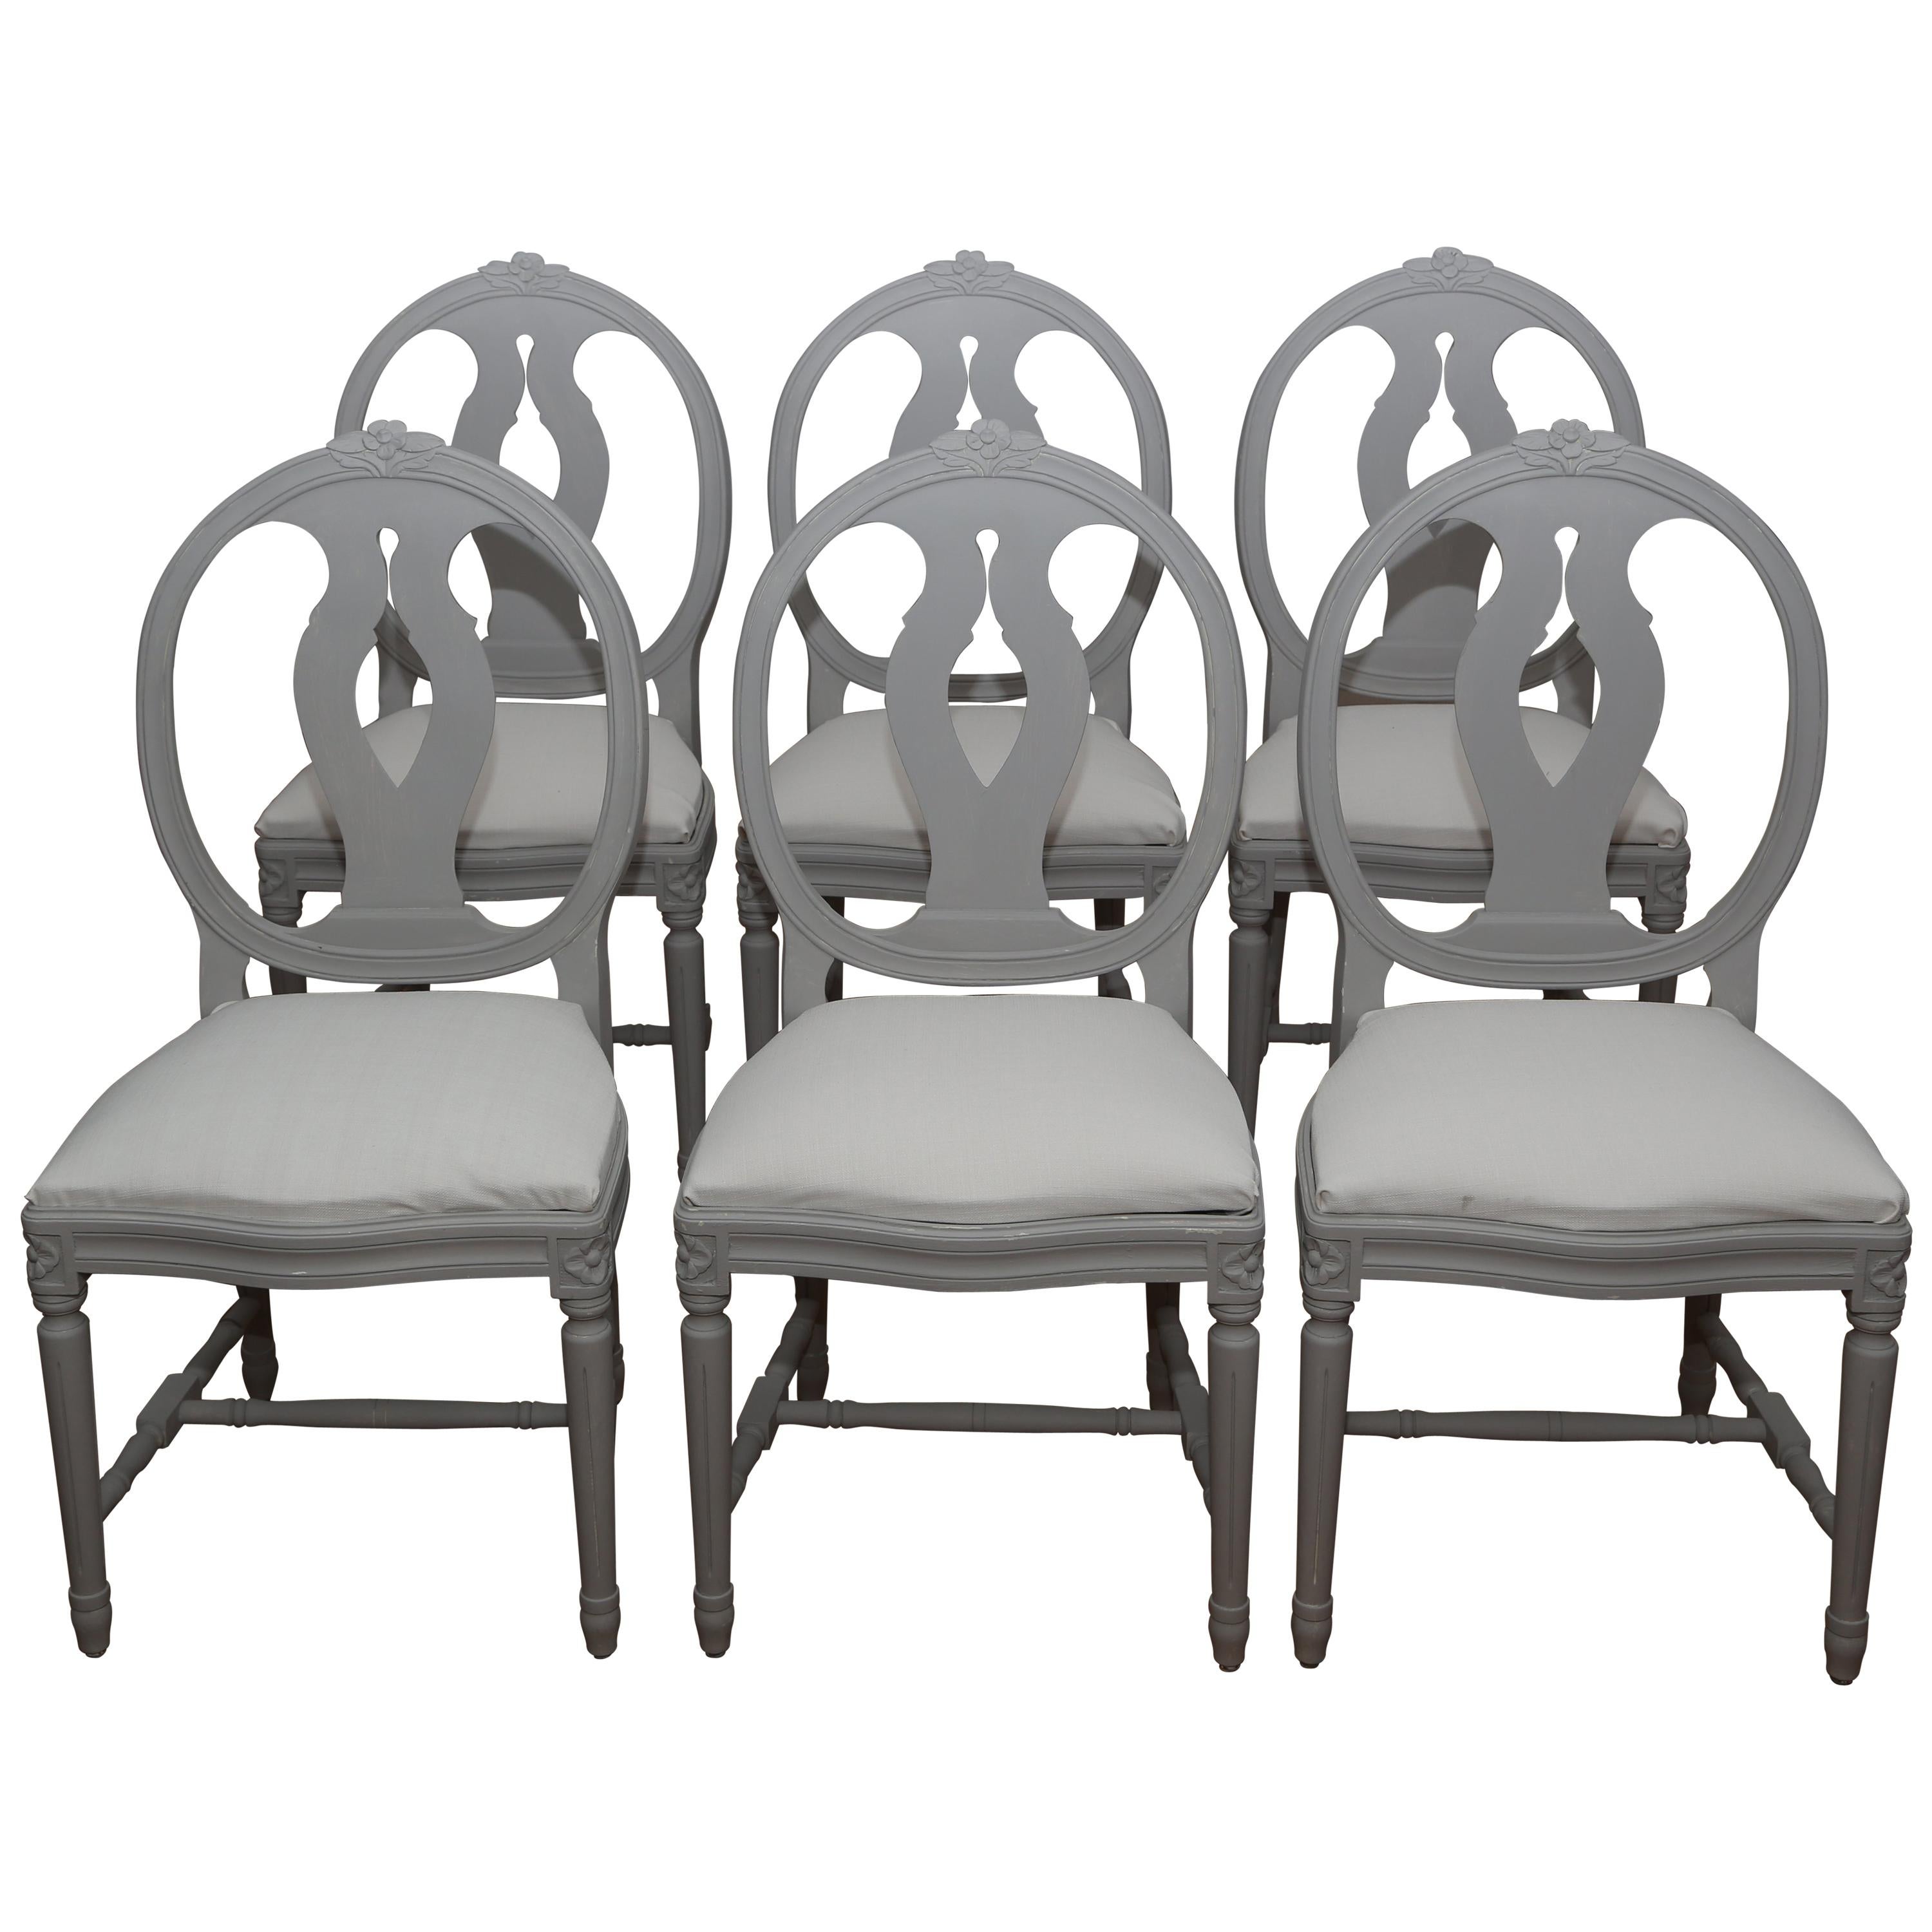 Swedish Gustavian Chairs, Set of 6, 1920 For Sale